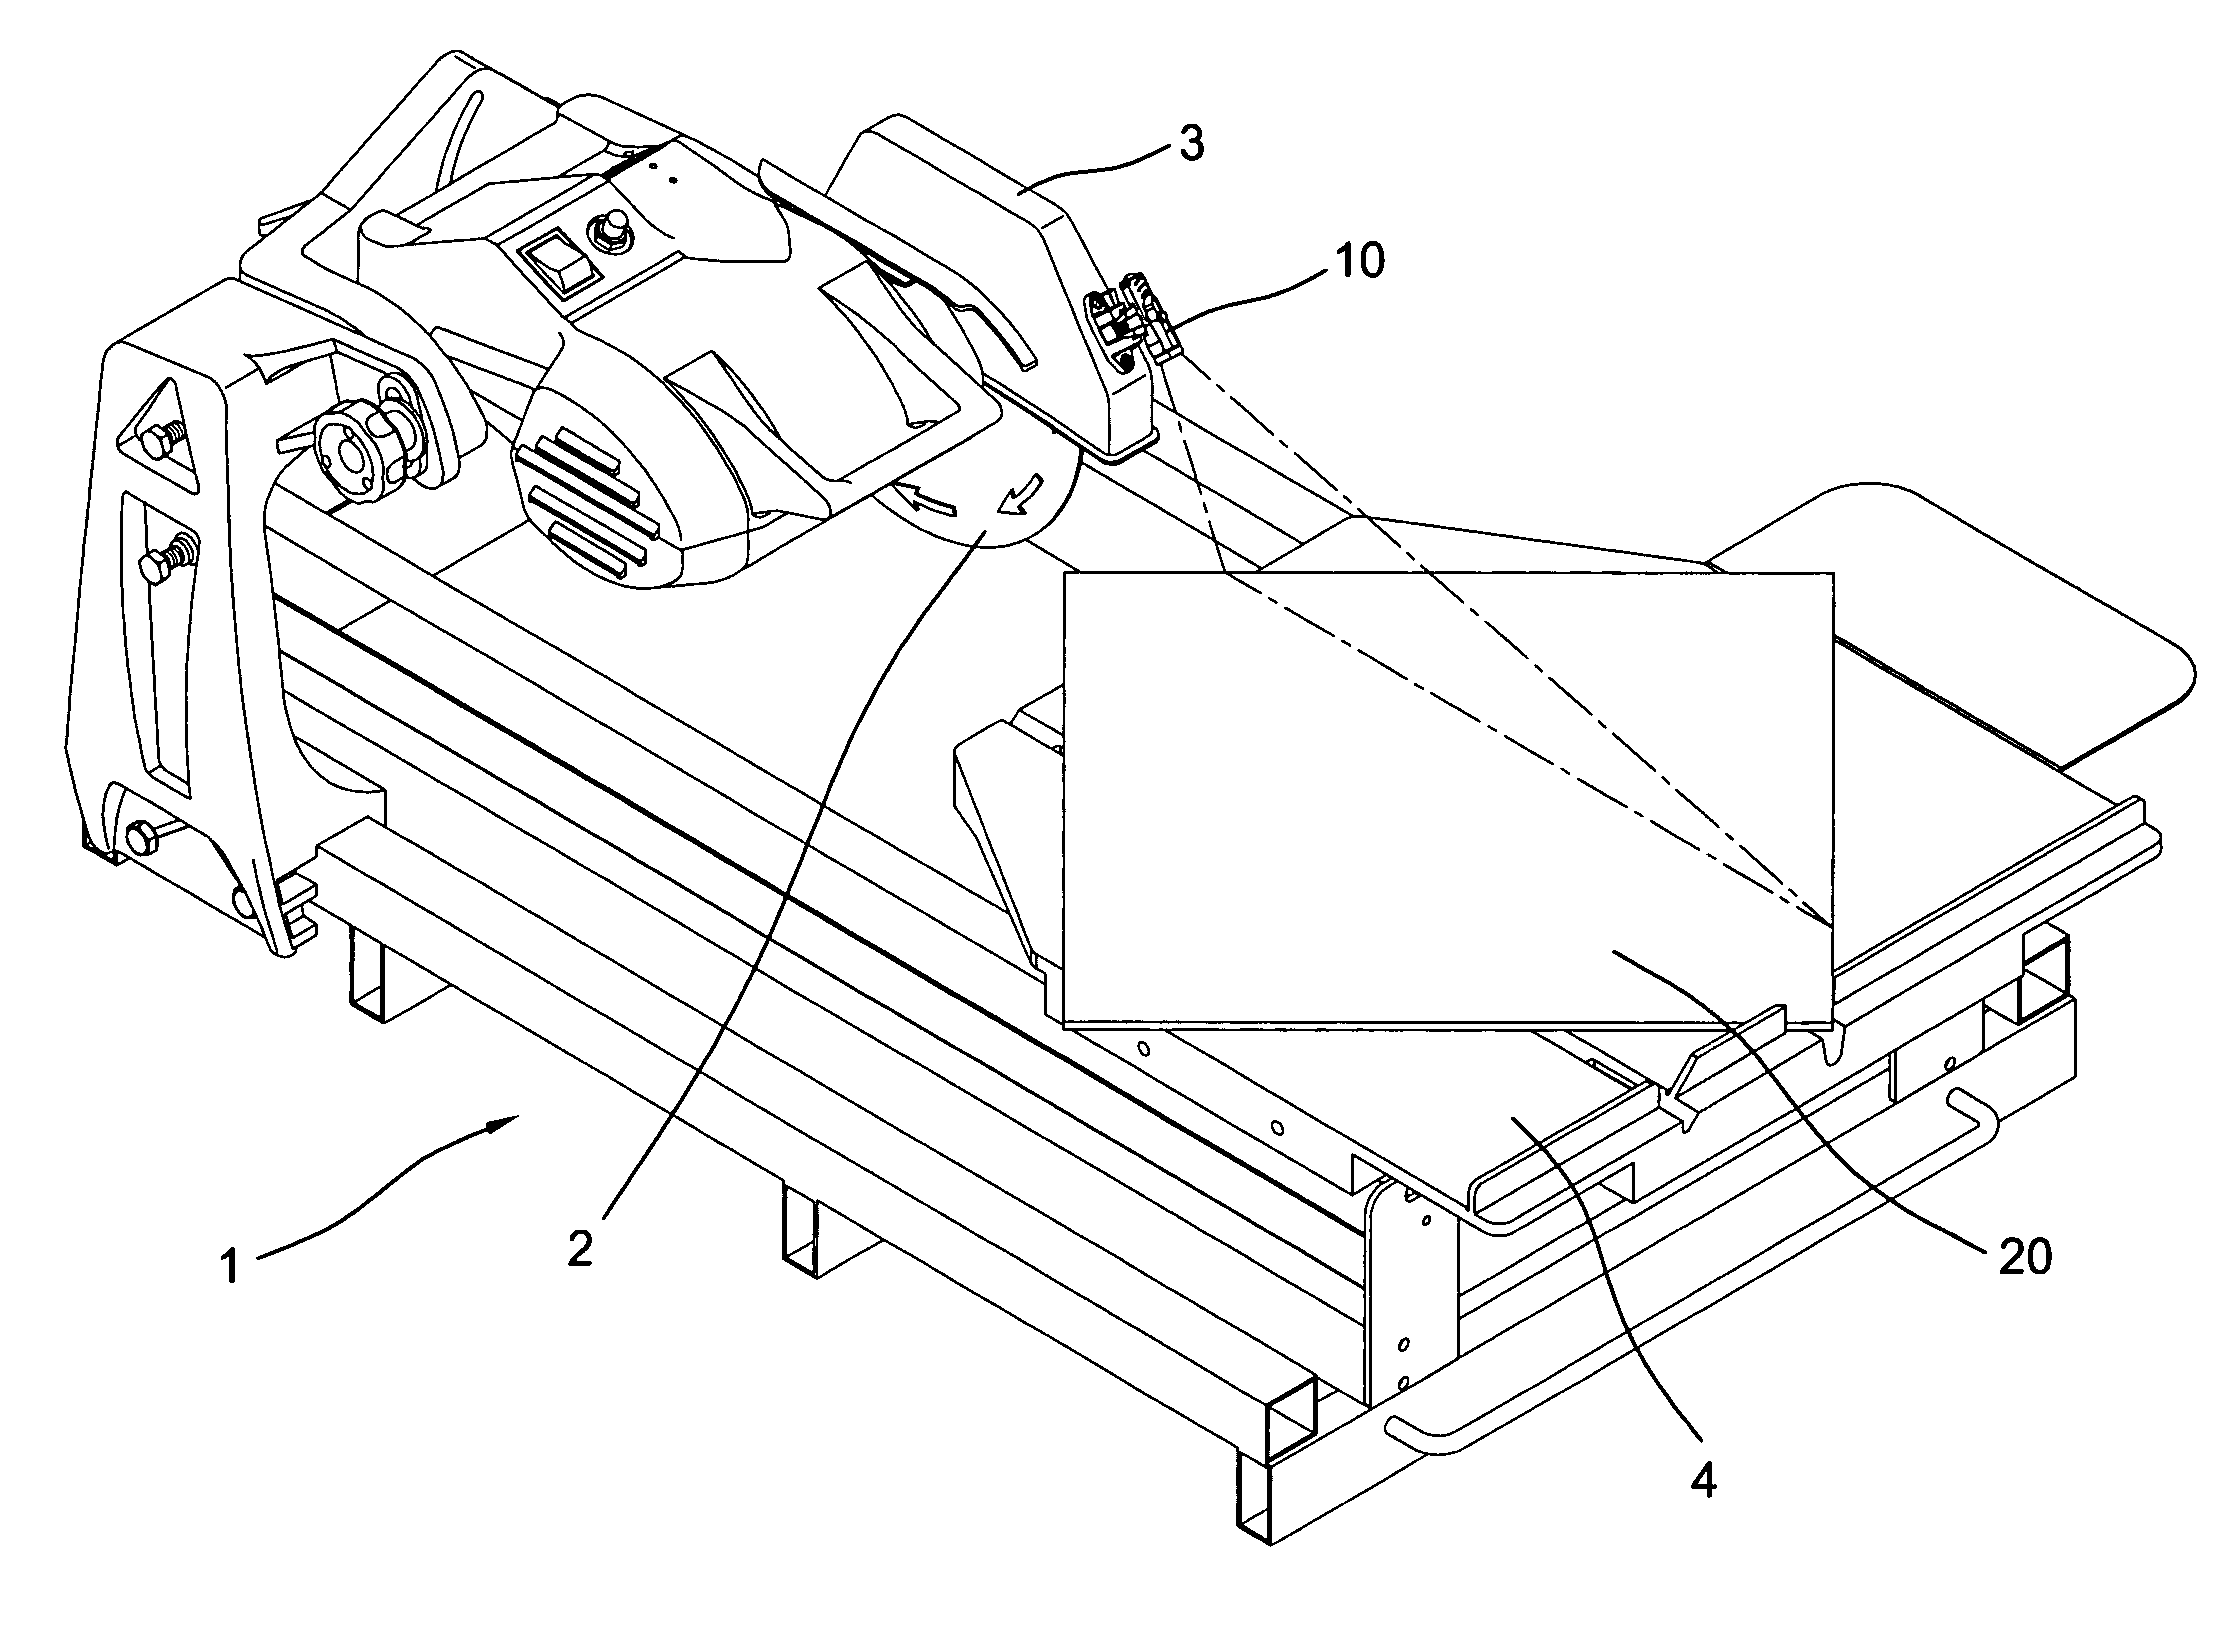 Laser light beam guiding device on a stone cutter